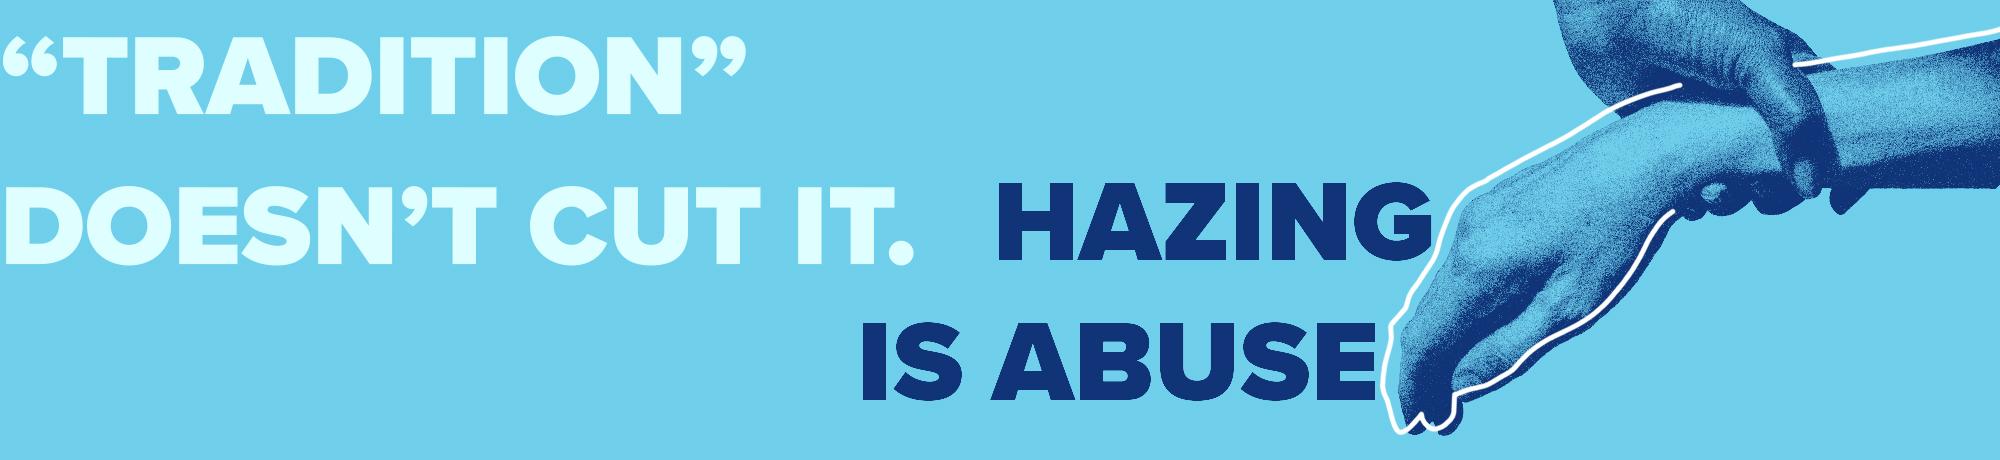 "Tradition" doesn't cut it. Hazing is abuse.